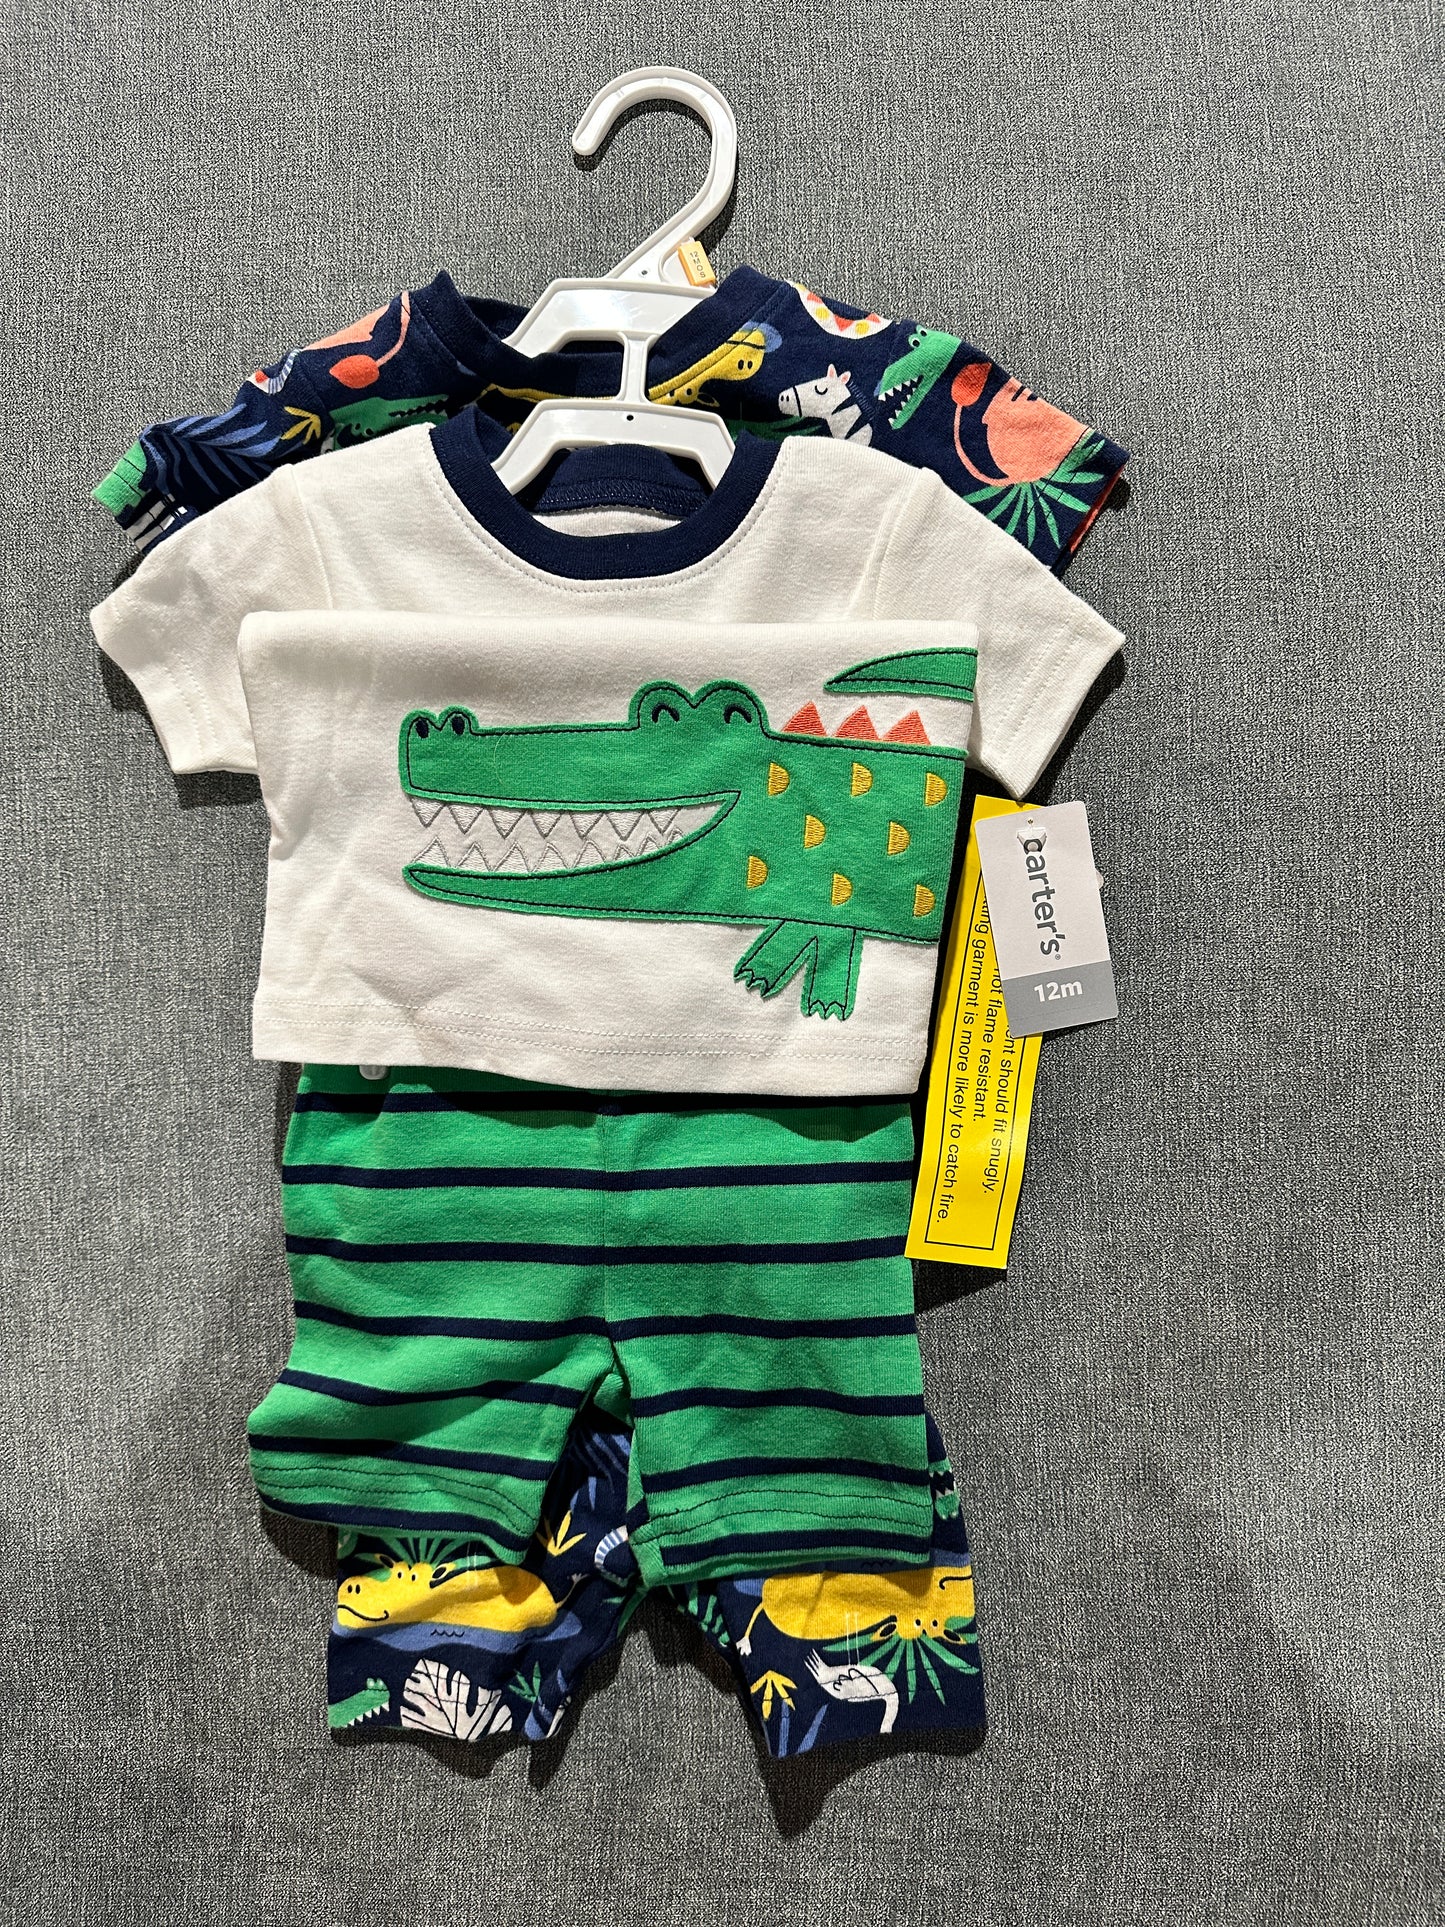 Boys NWT 12 month 4 piece shorts and shirt set Carter’s